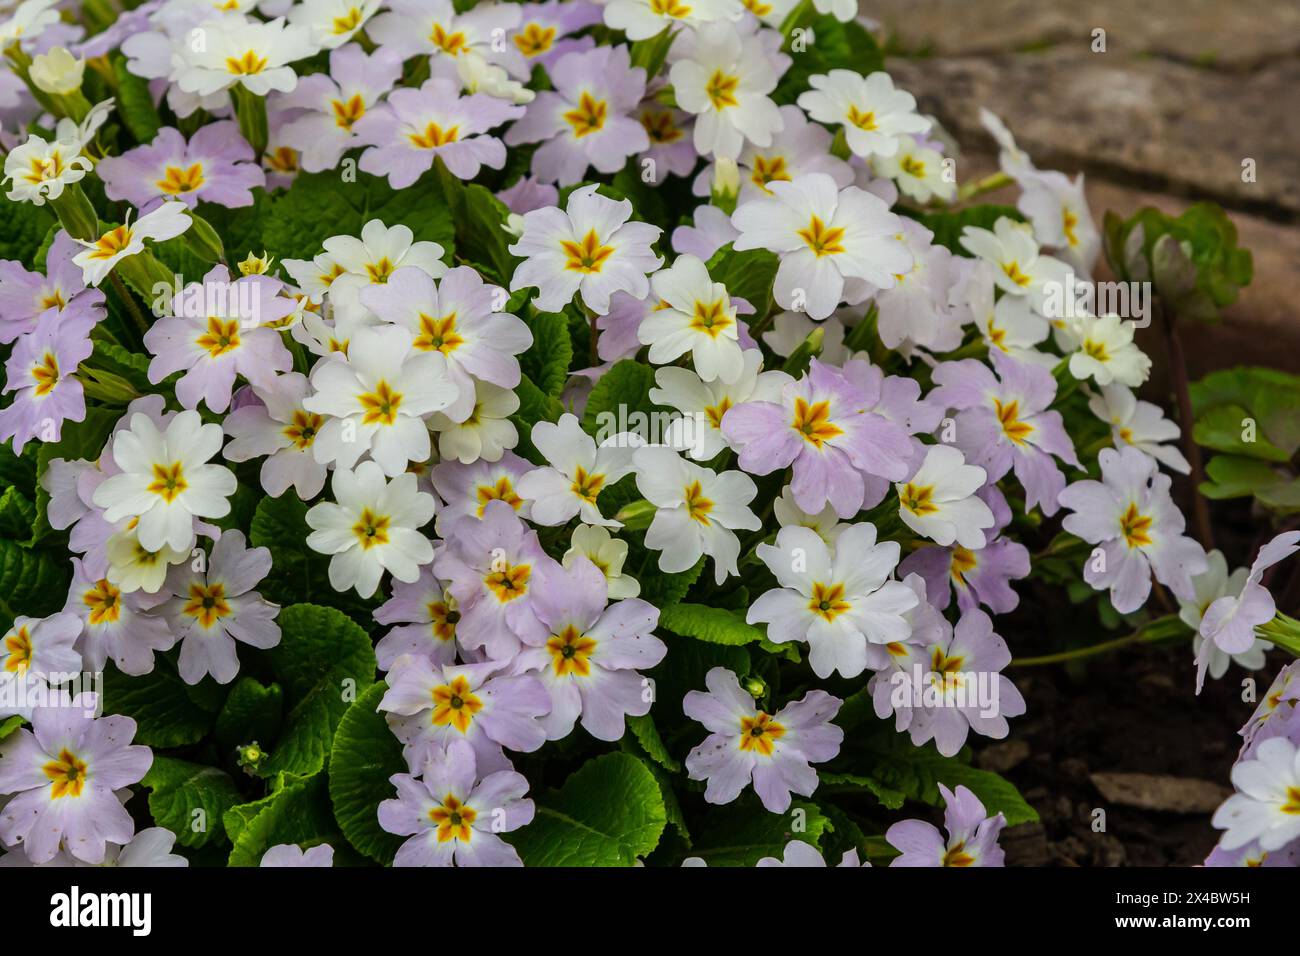 Spring flowers. Blooming primrose or primula flowers in a garden. Stock Photo